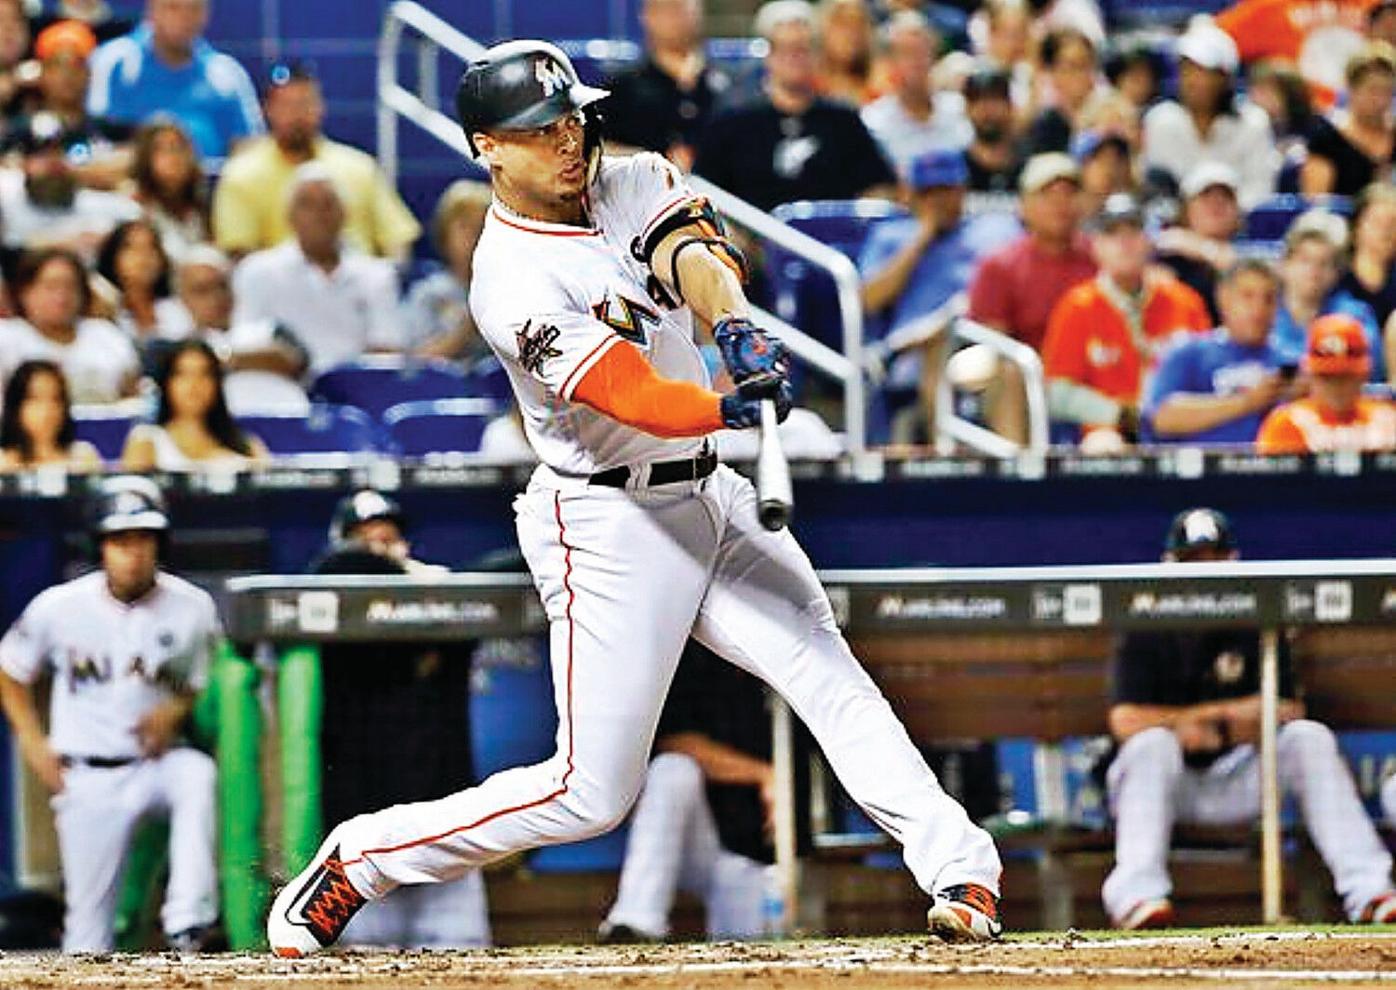 How He Trains: Giancarlo Stanton's Best Workouts and Training